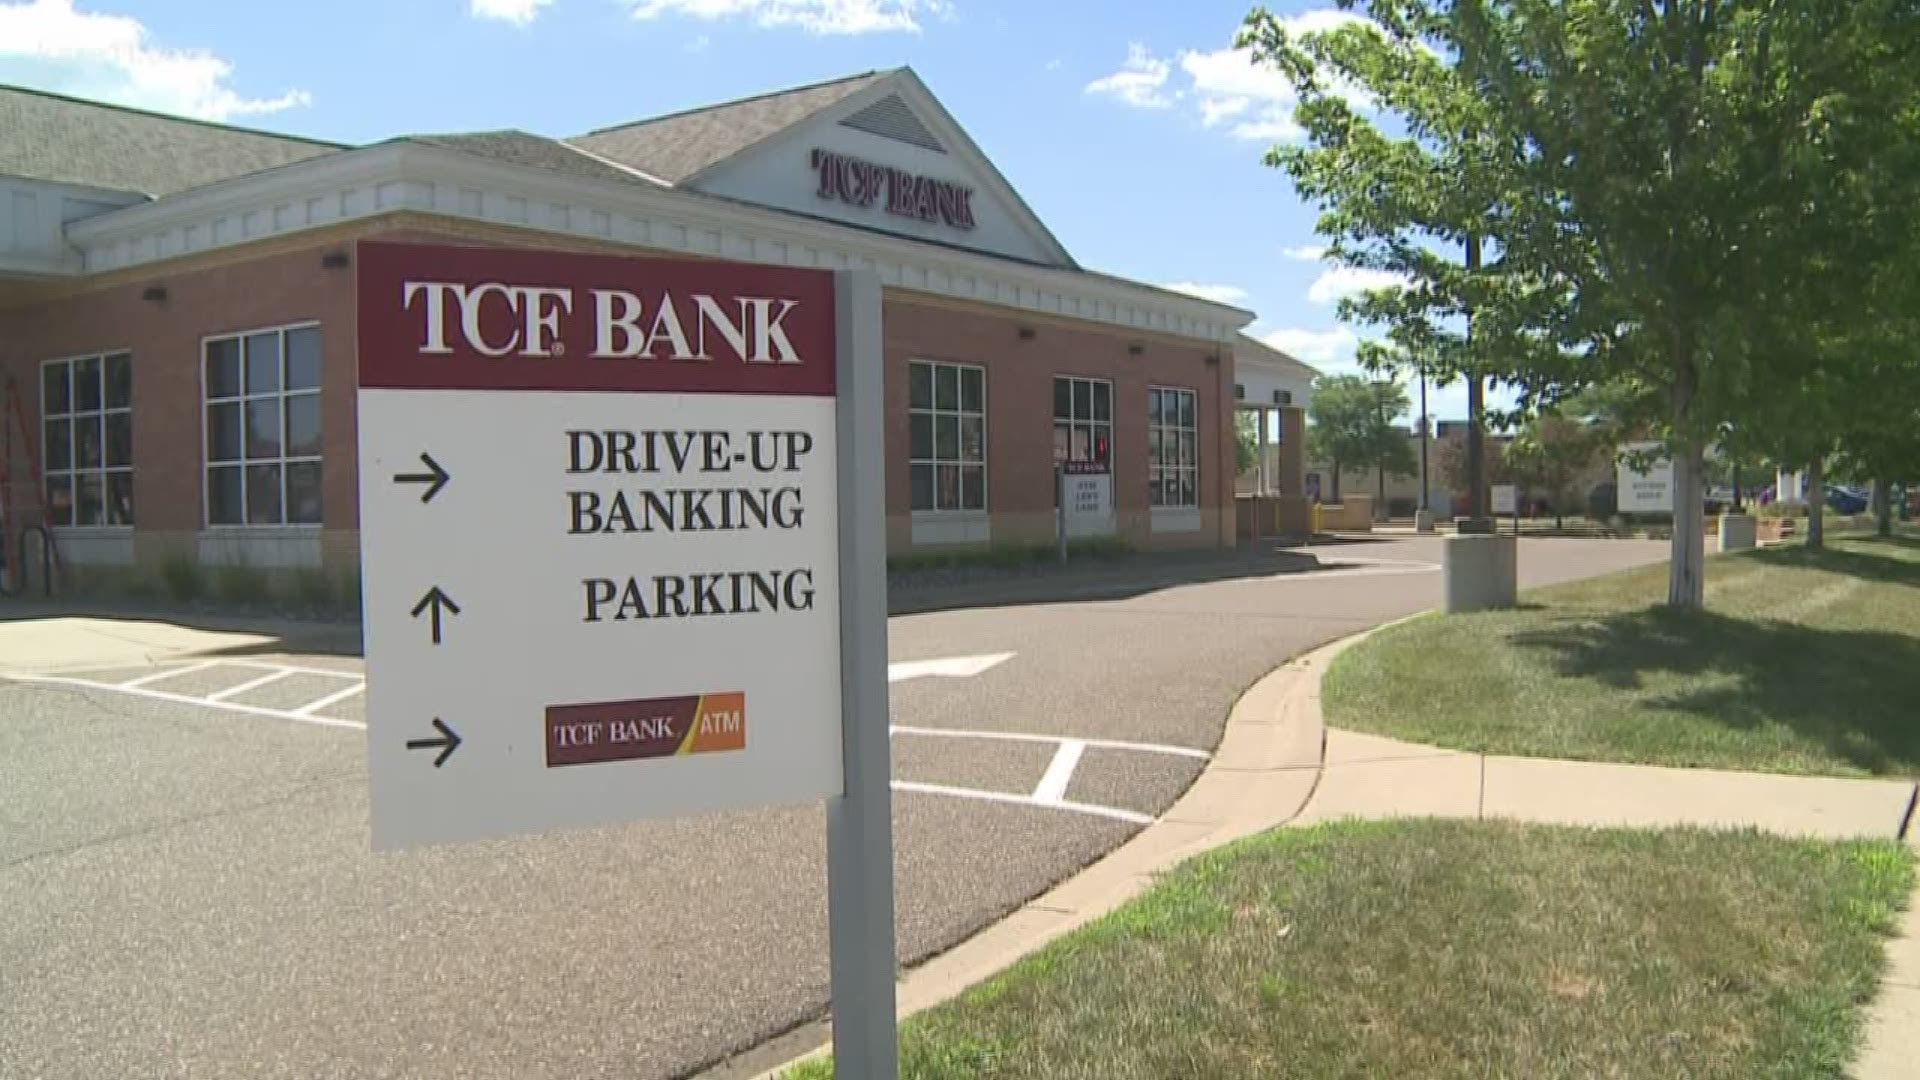 Police say the ATM machine at the Crystal TCF Bank may have been compromised with a skimming machine. https://kare11.tv/2L5Az0j